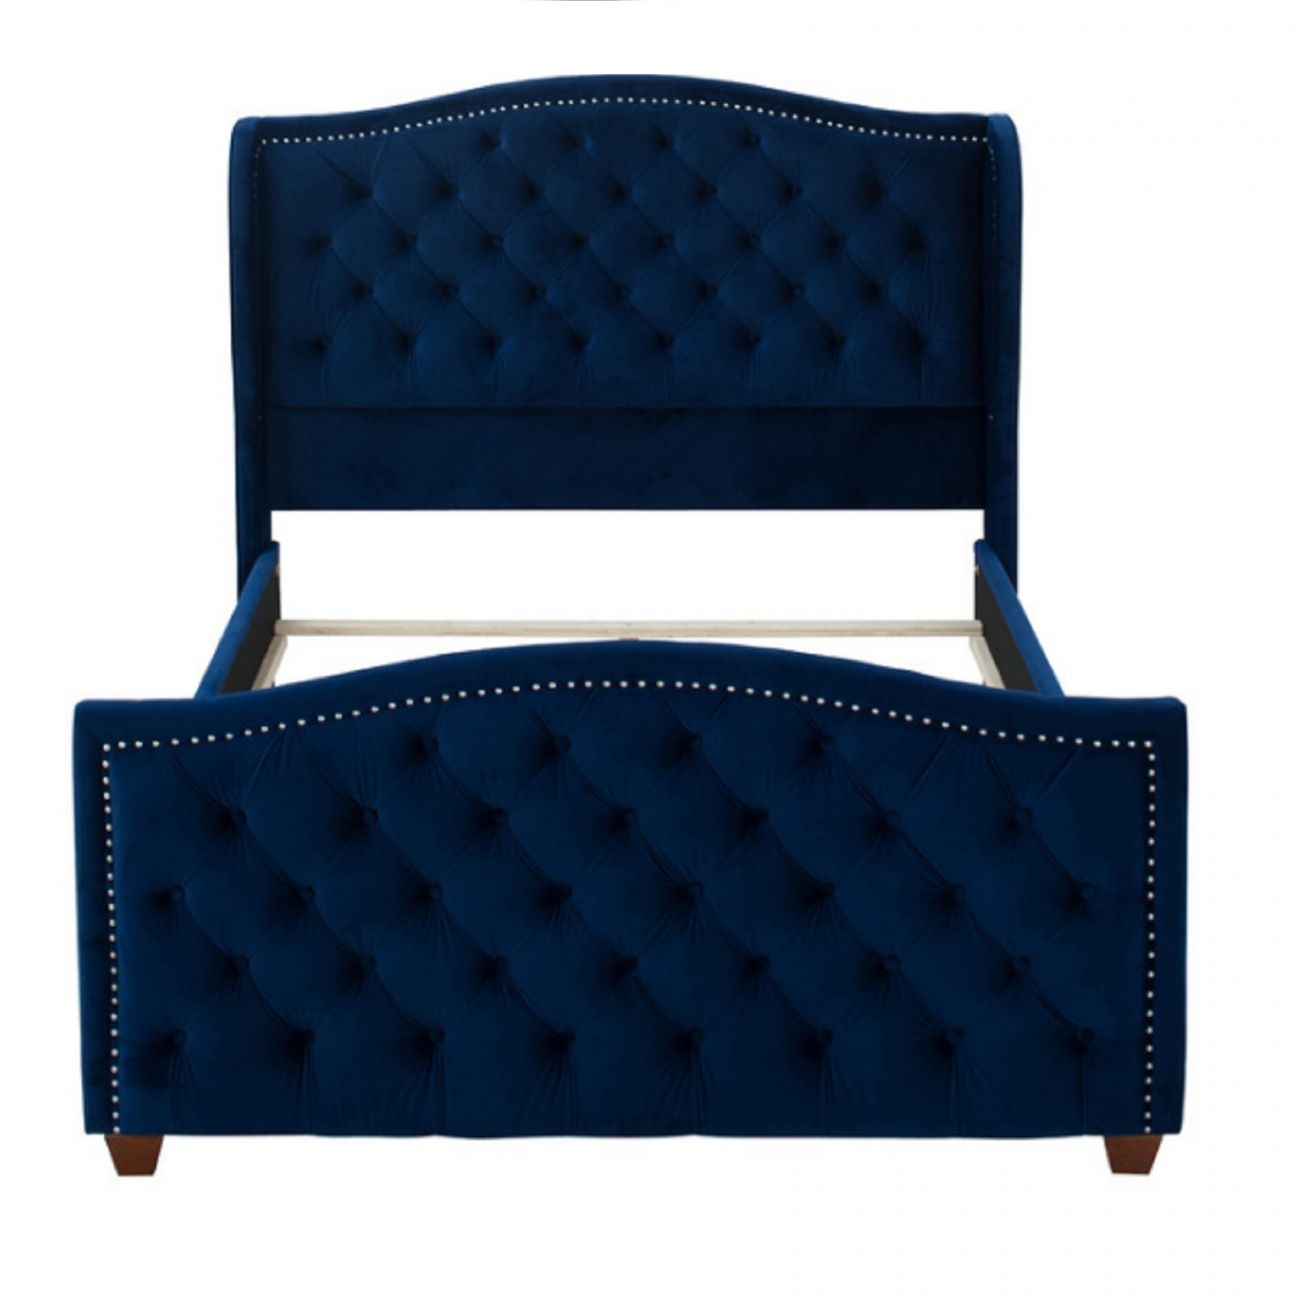 Double bed with upholstered headboard 160x200 cm blue Marcella